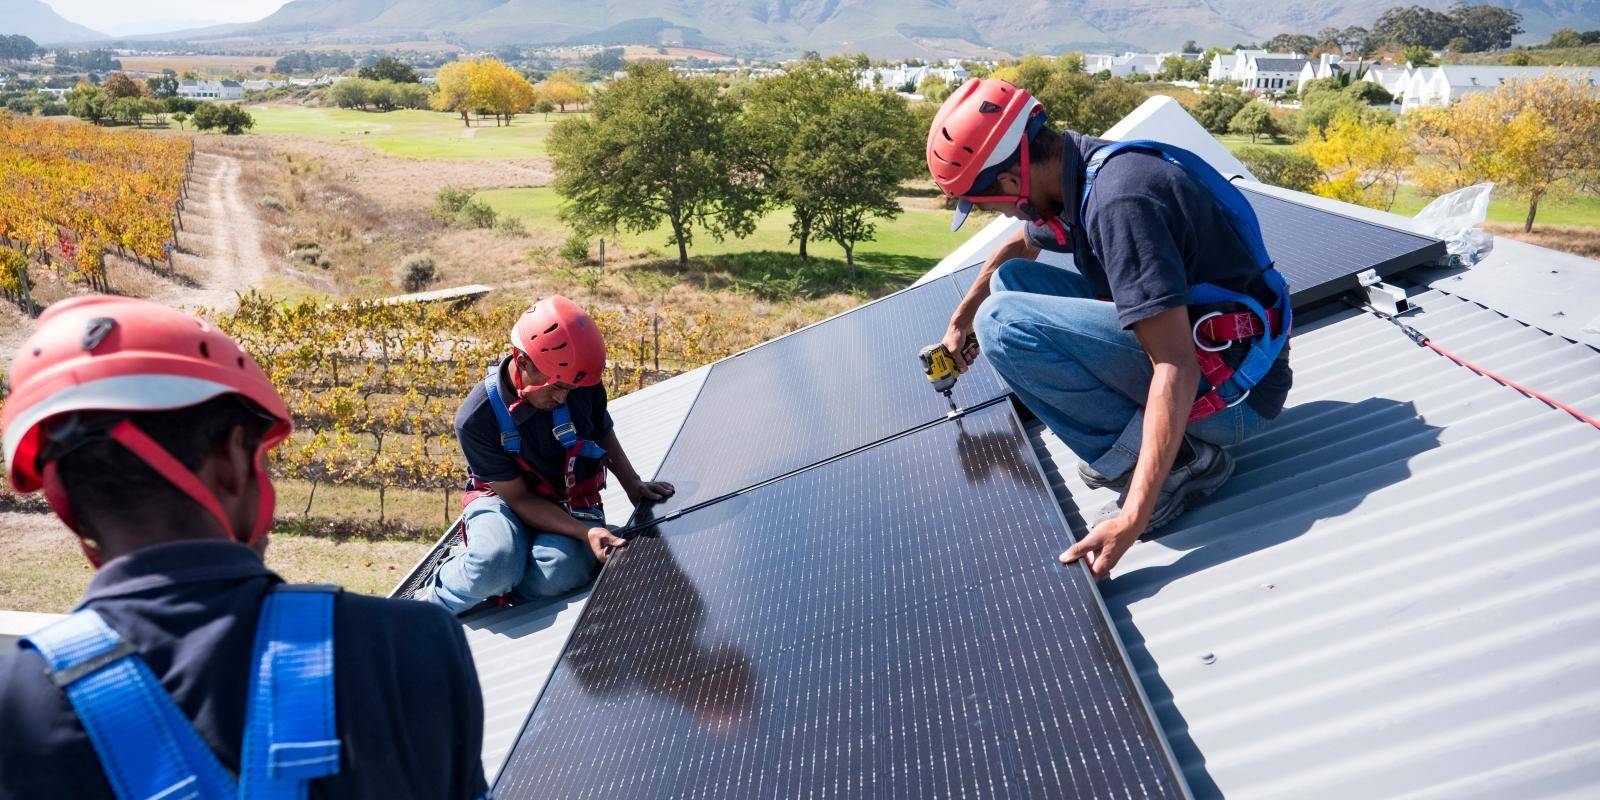 A team of workers install brackets for solar panels on the roof of a house in Cape Town, South Africa.